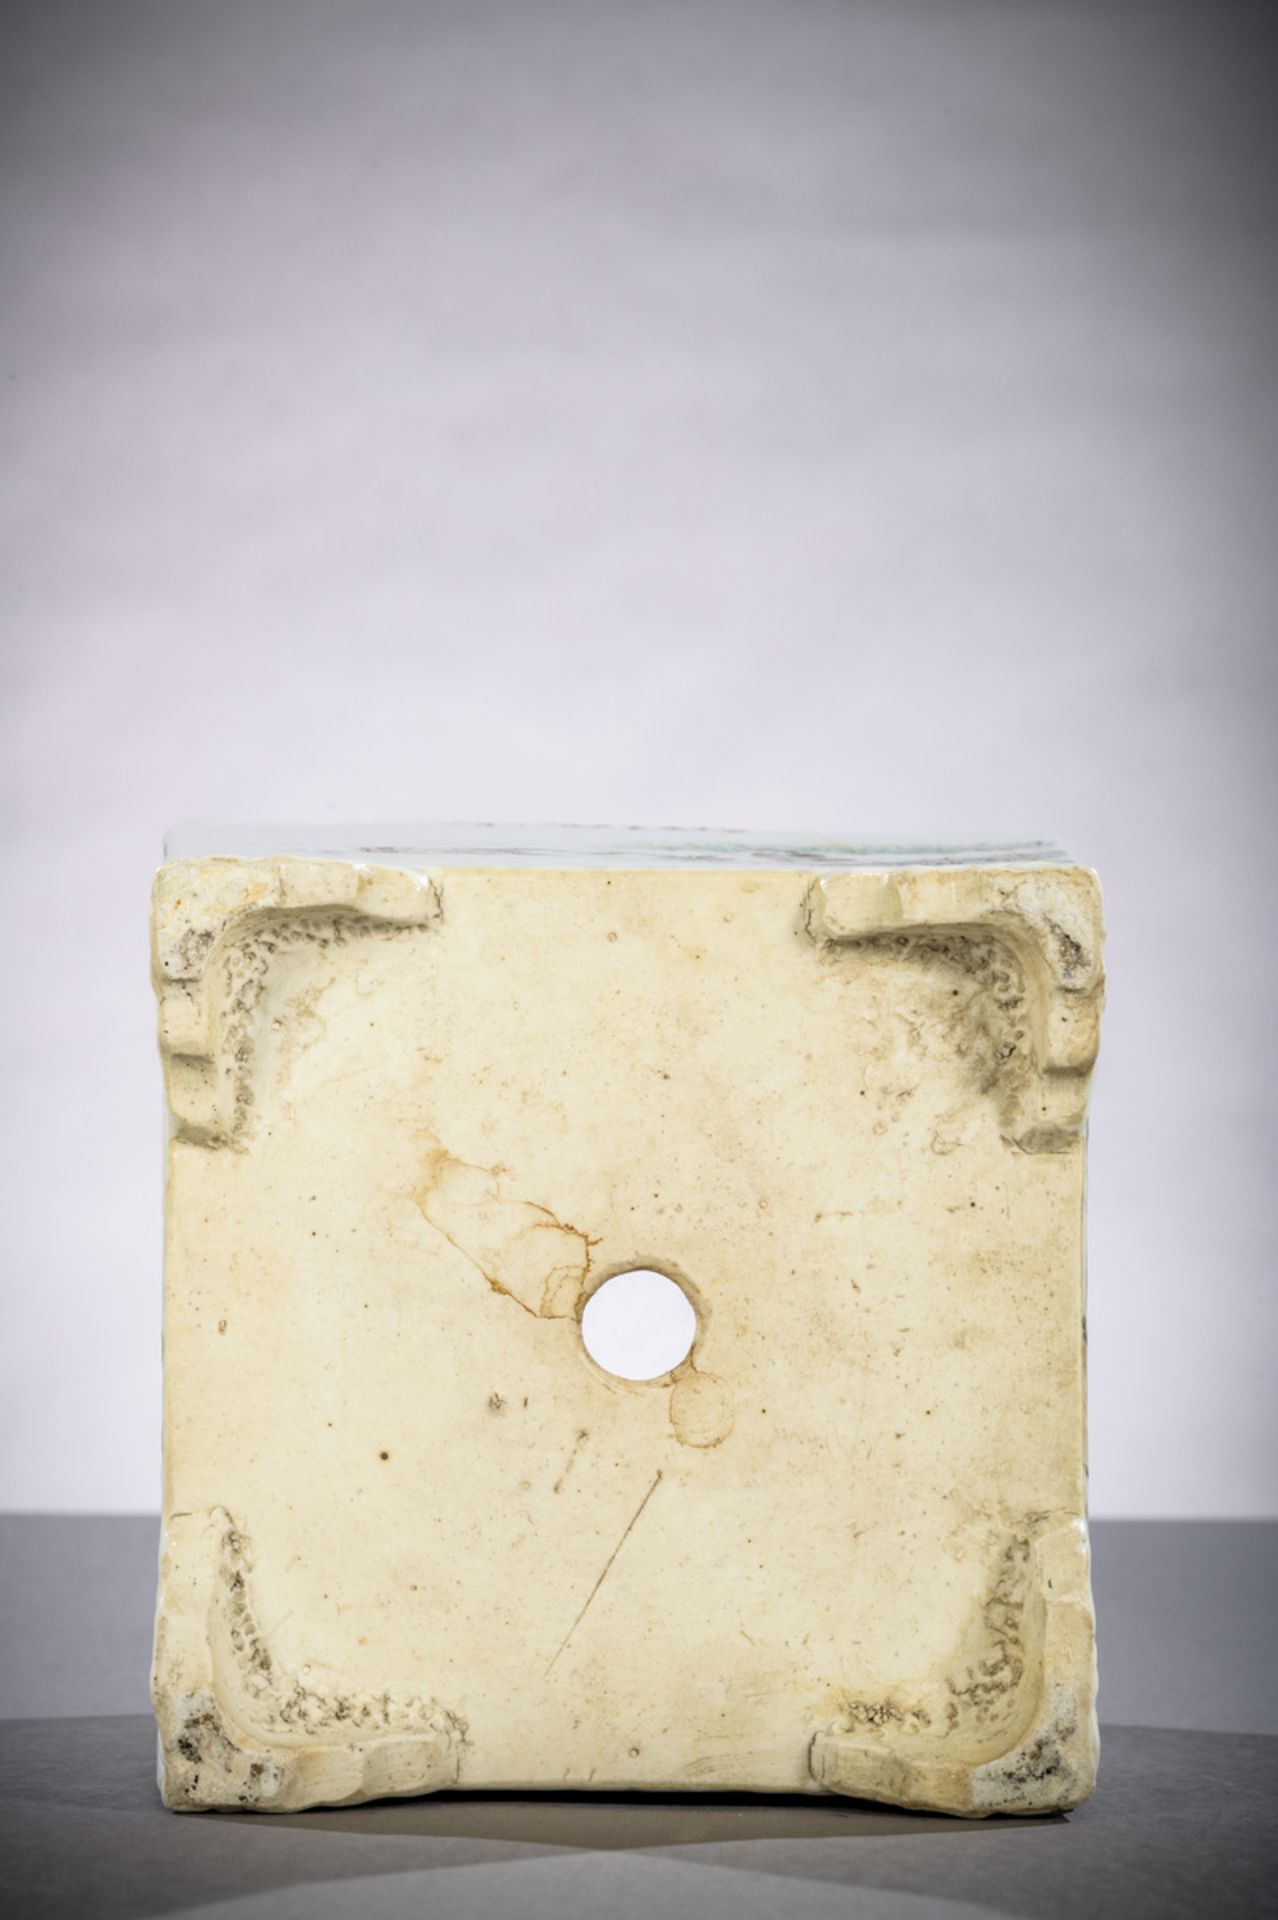 Square planter in Chinese porcelain 'characters and birds', Republic period (29x19x19 cm) - Image 6 of 9